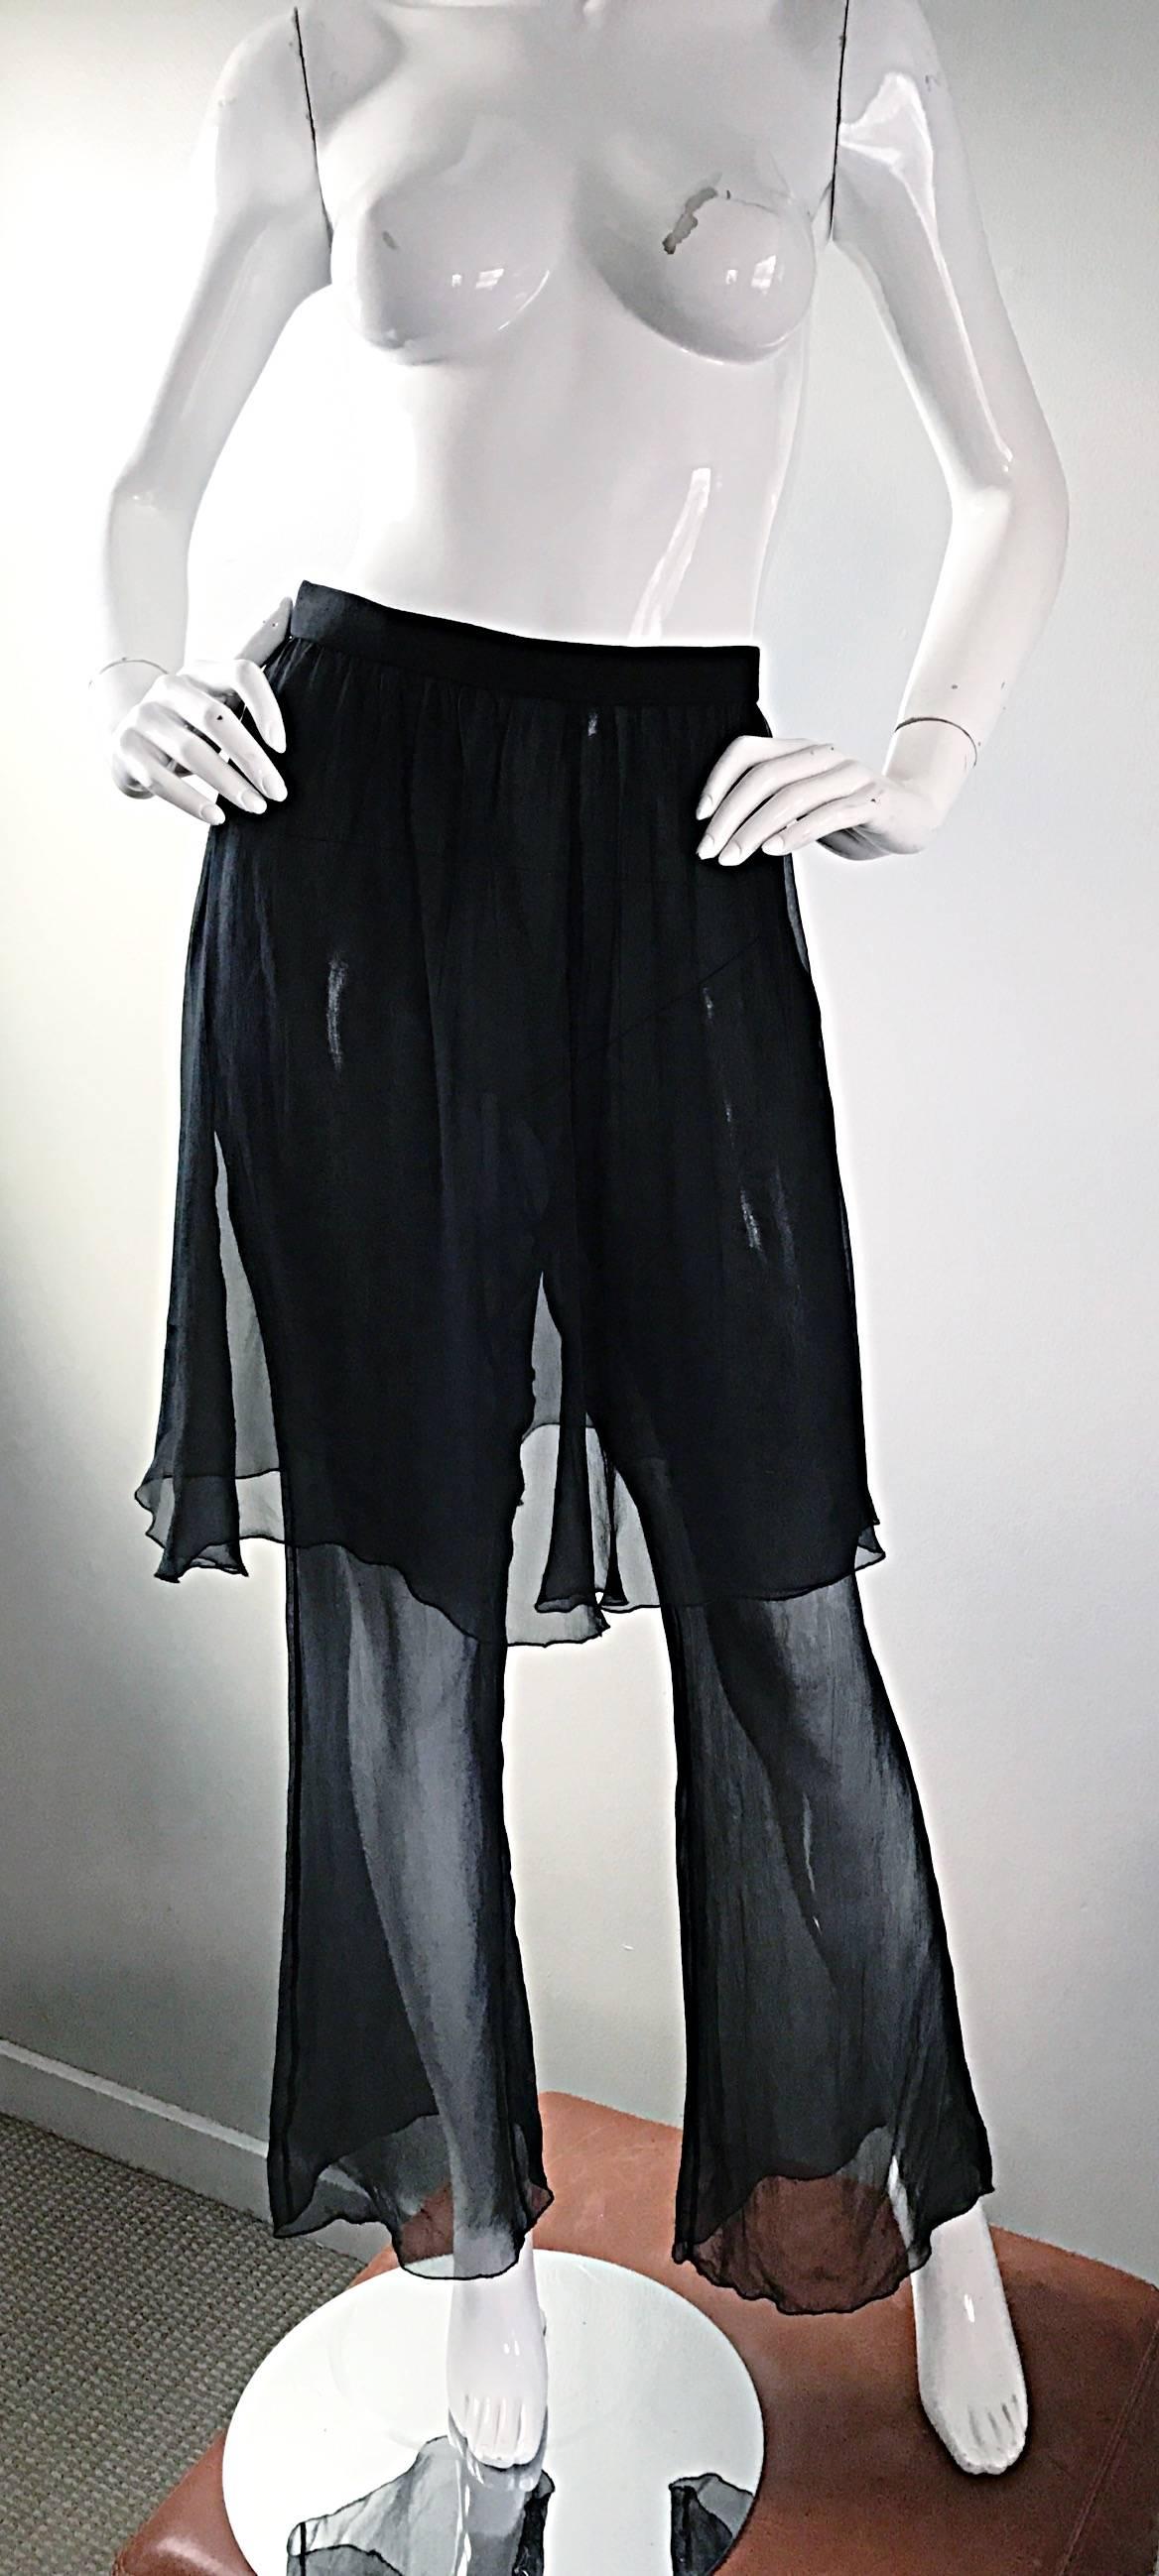 Amazing vintage 1990s KARL LAGERFELD black silk chiffon wide leg trousers, with attached semi sheer skirt! This is a prime example of what  made Lagerfeld so successful in his career. The design genius not only had his own label, but was head